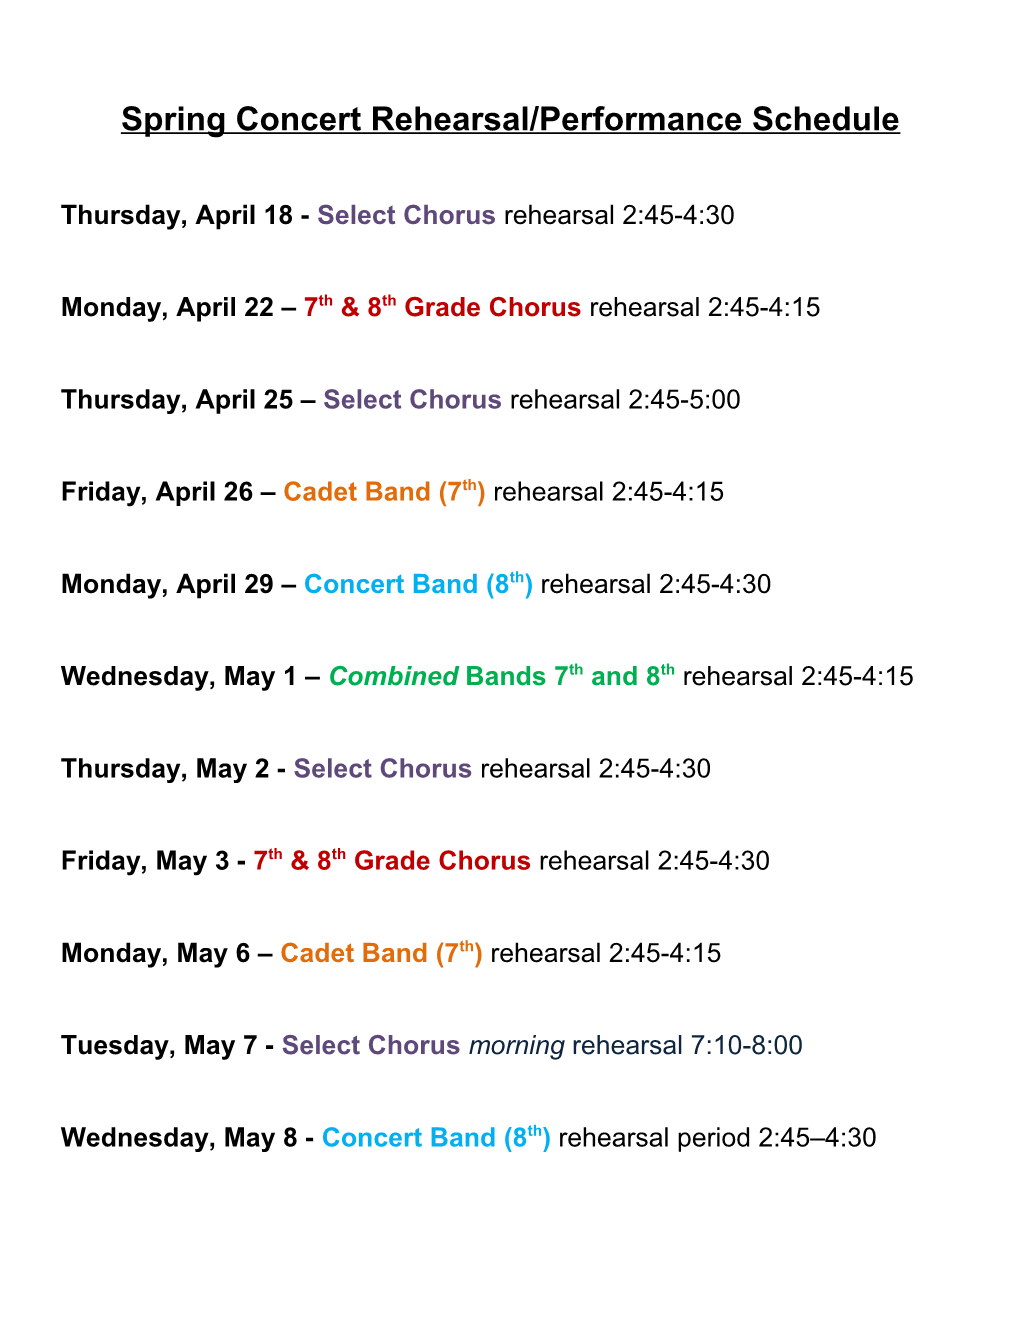 Thursday, April 3Rd 7Th Grade Chorus Rehearsal Periods 1 and 2